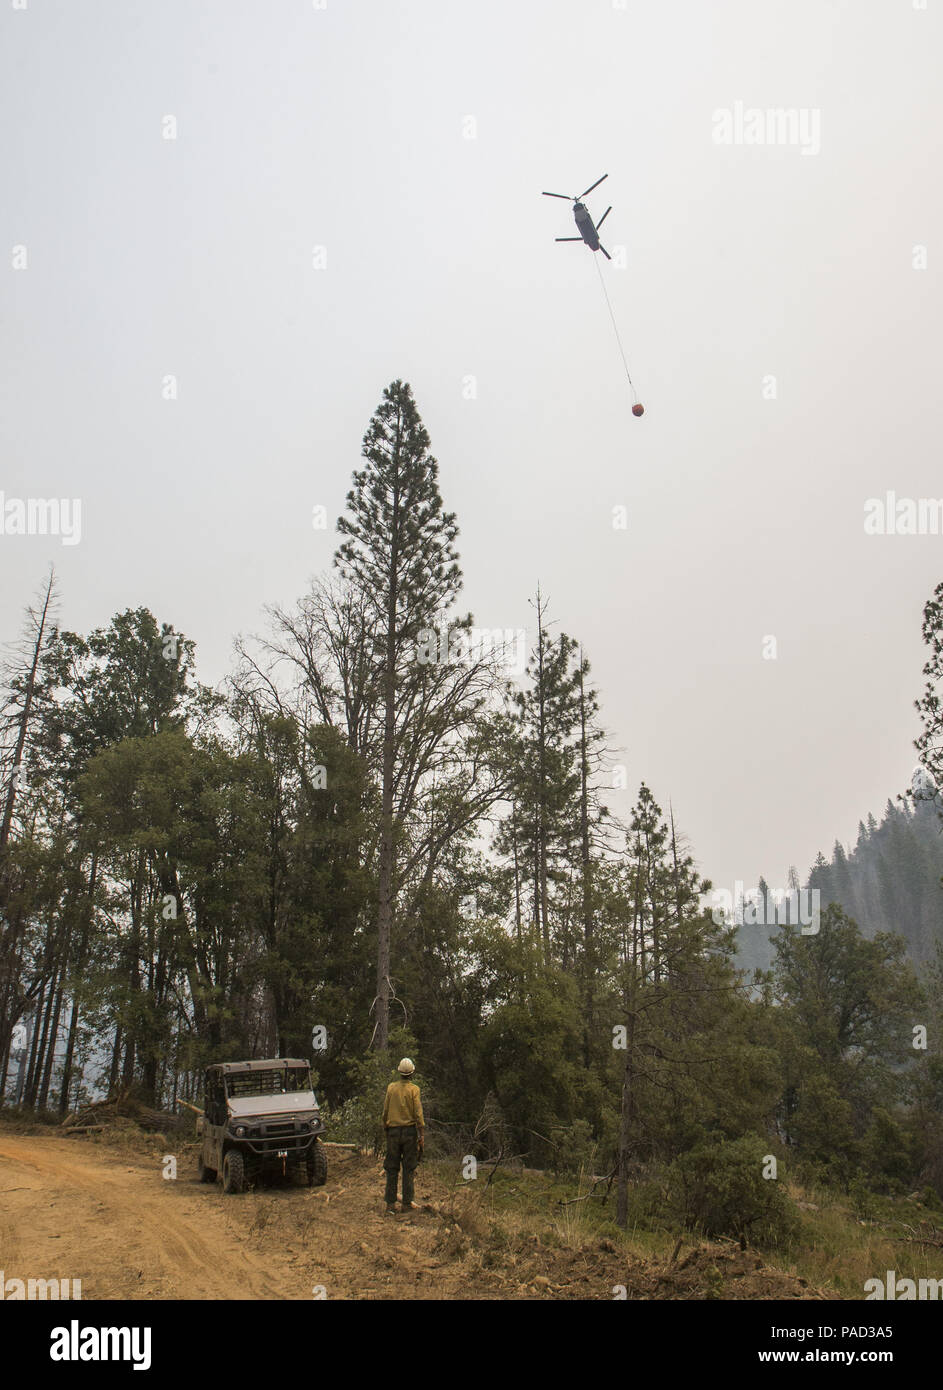 Mariposa, California, U.S.A. 21st July, 2018. A US Forest Service Firefighter watches as a helicopter drops water on a fire that was running up the Skelton Creek drainage. The Ferguson Fire in Mariposa County just west of Yosemite National Park has burned over 29,000 acres and is 6% contained as of Saturday July 21, 2018 according to U.S. Forest Service. Credit: Marty Bicek/ZUMA Wire/Alamy Live News Stock Photo